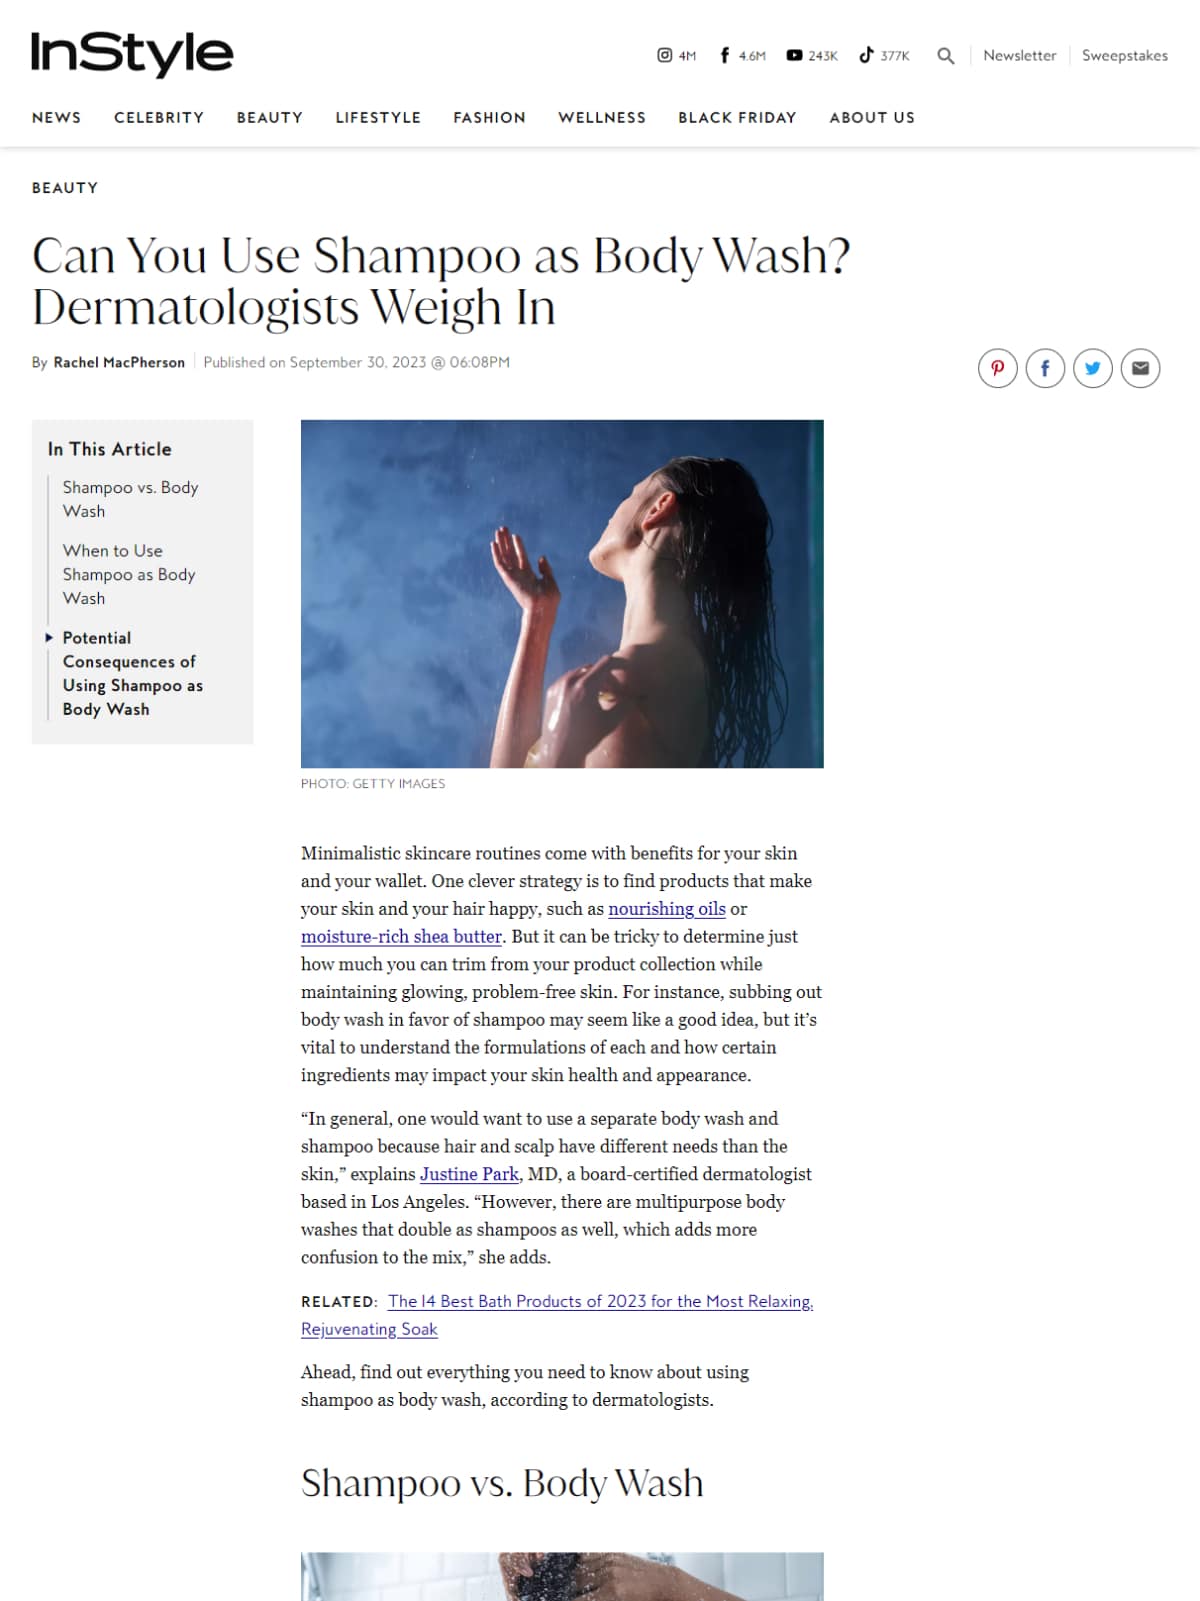 Can You Use Shampoo as Body Wash